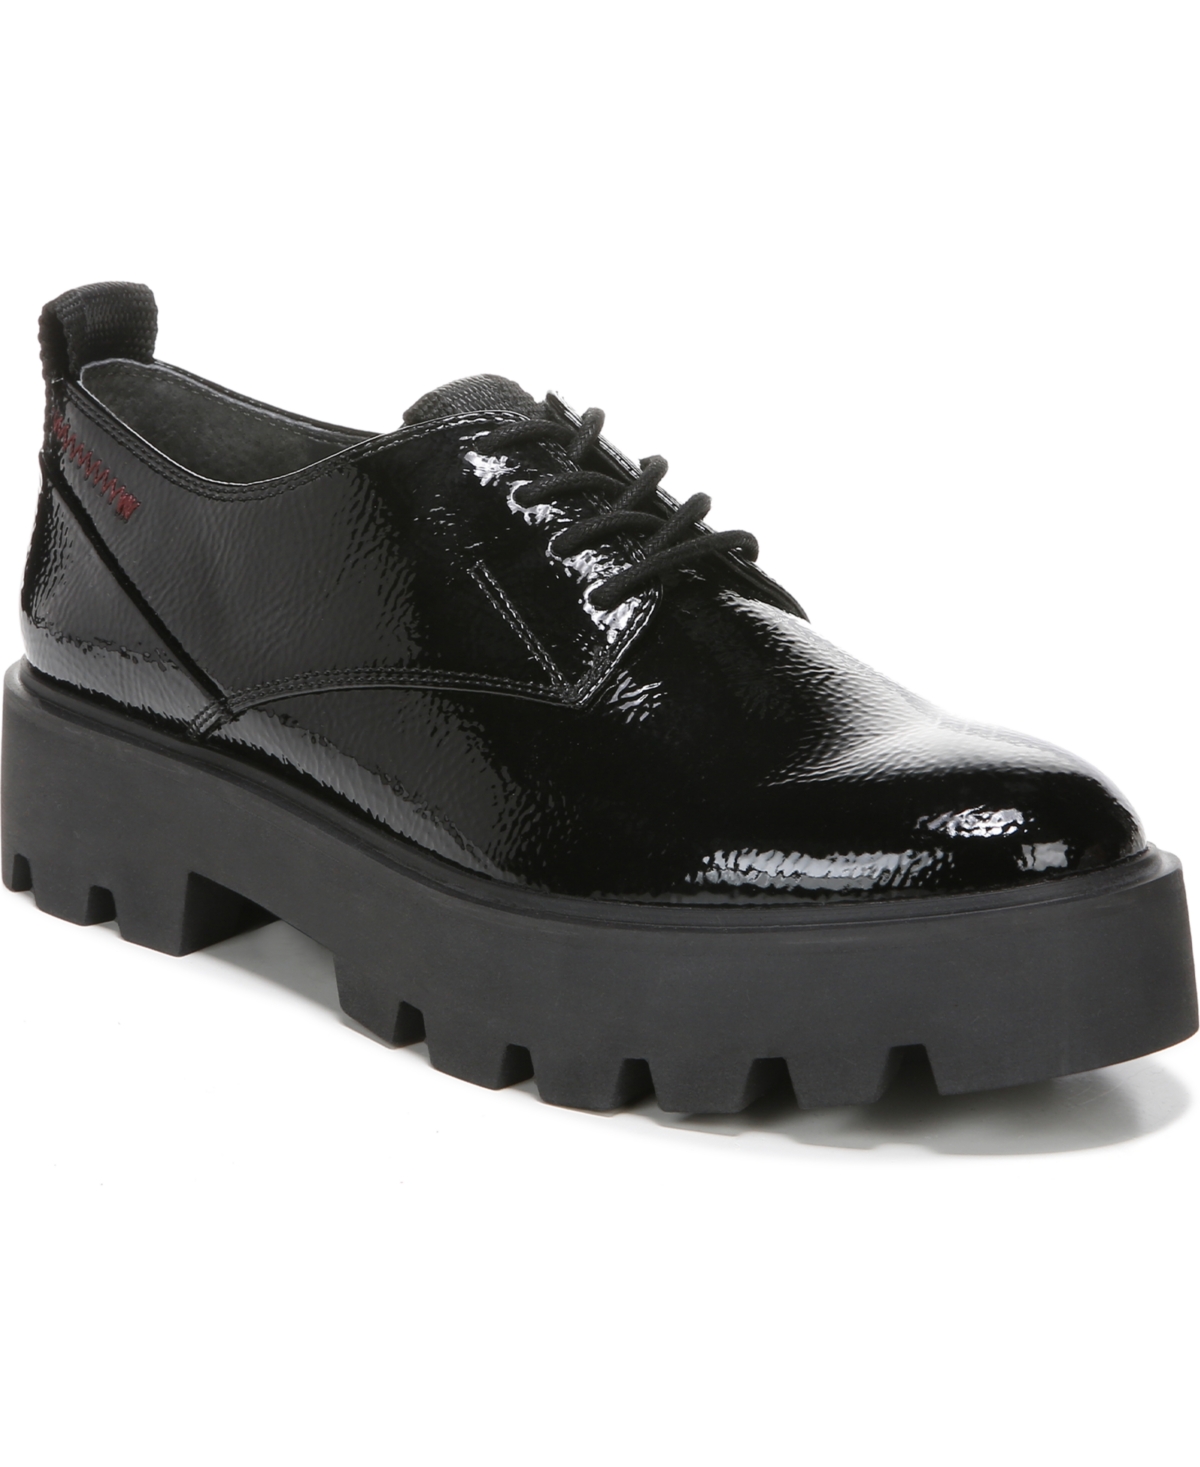 UPC 017138587365 product image for Franco Sarto Balin-Laced Lug Sole Oxfords Women's Shoes | upcitemdb.com